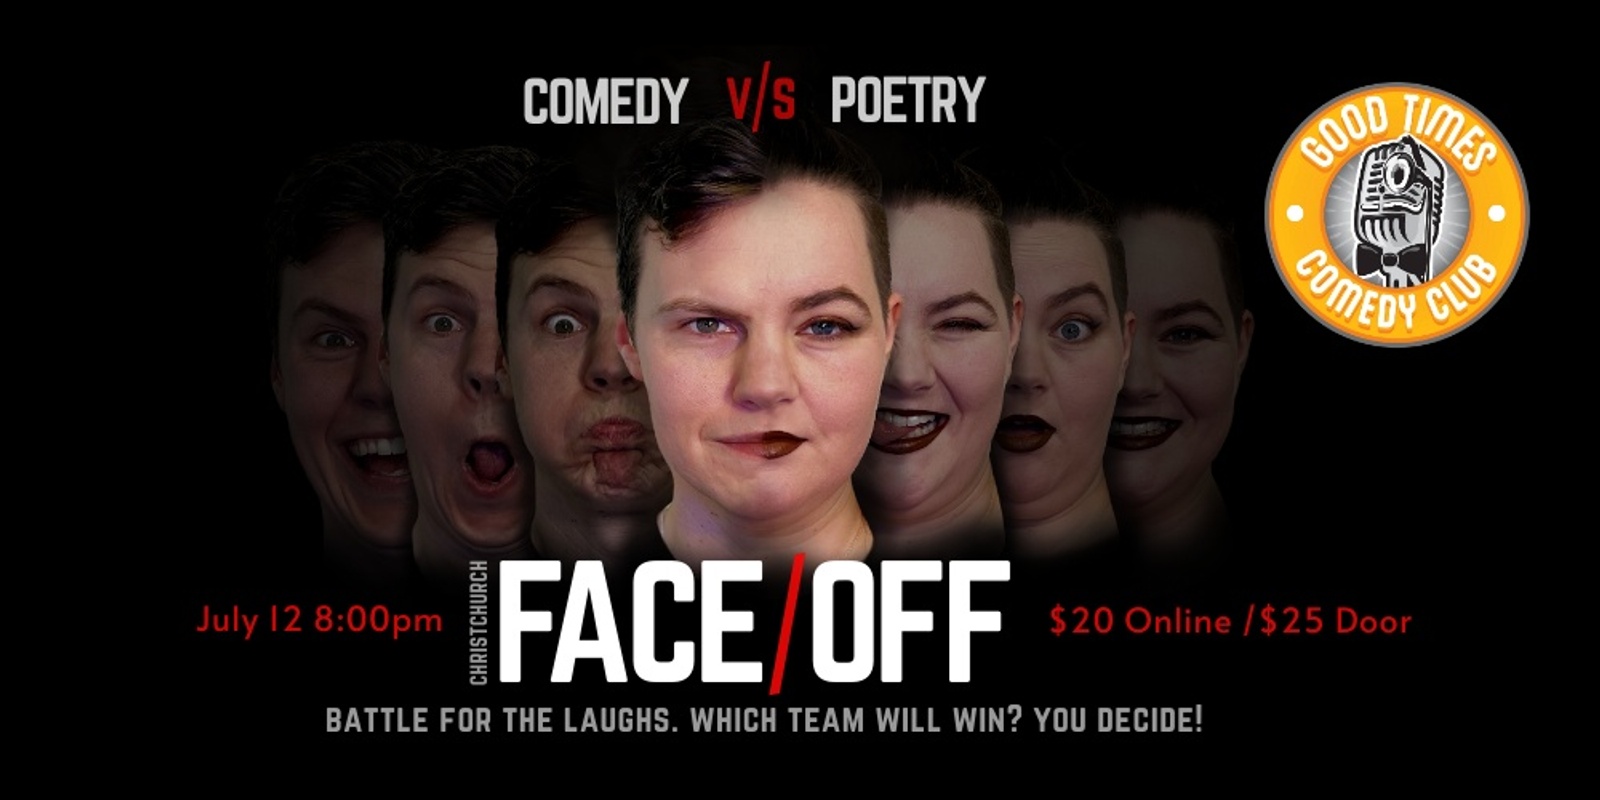 Banner image for Face/Off - Comedy vs Poetry